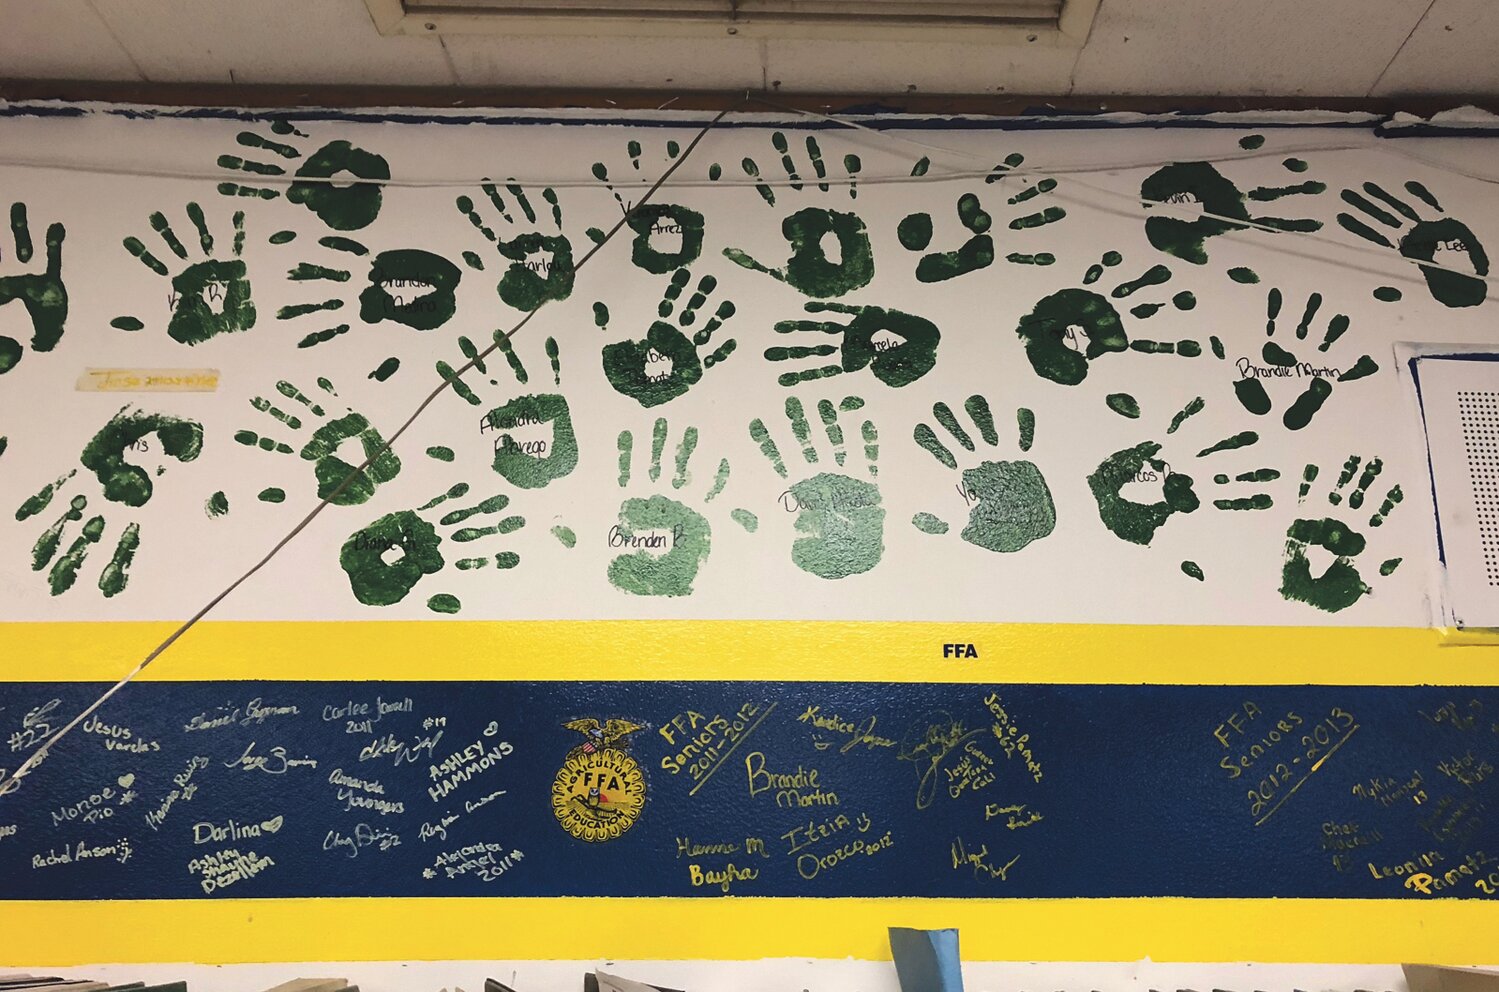 The infamous Green Hand Senior Wall is part of FFA tradition at Brewster High School.